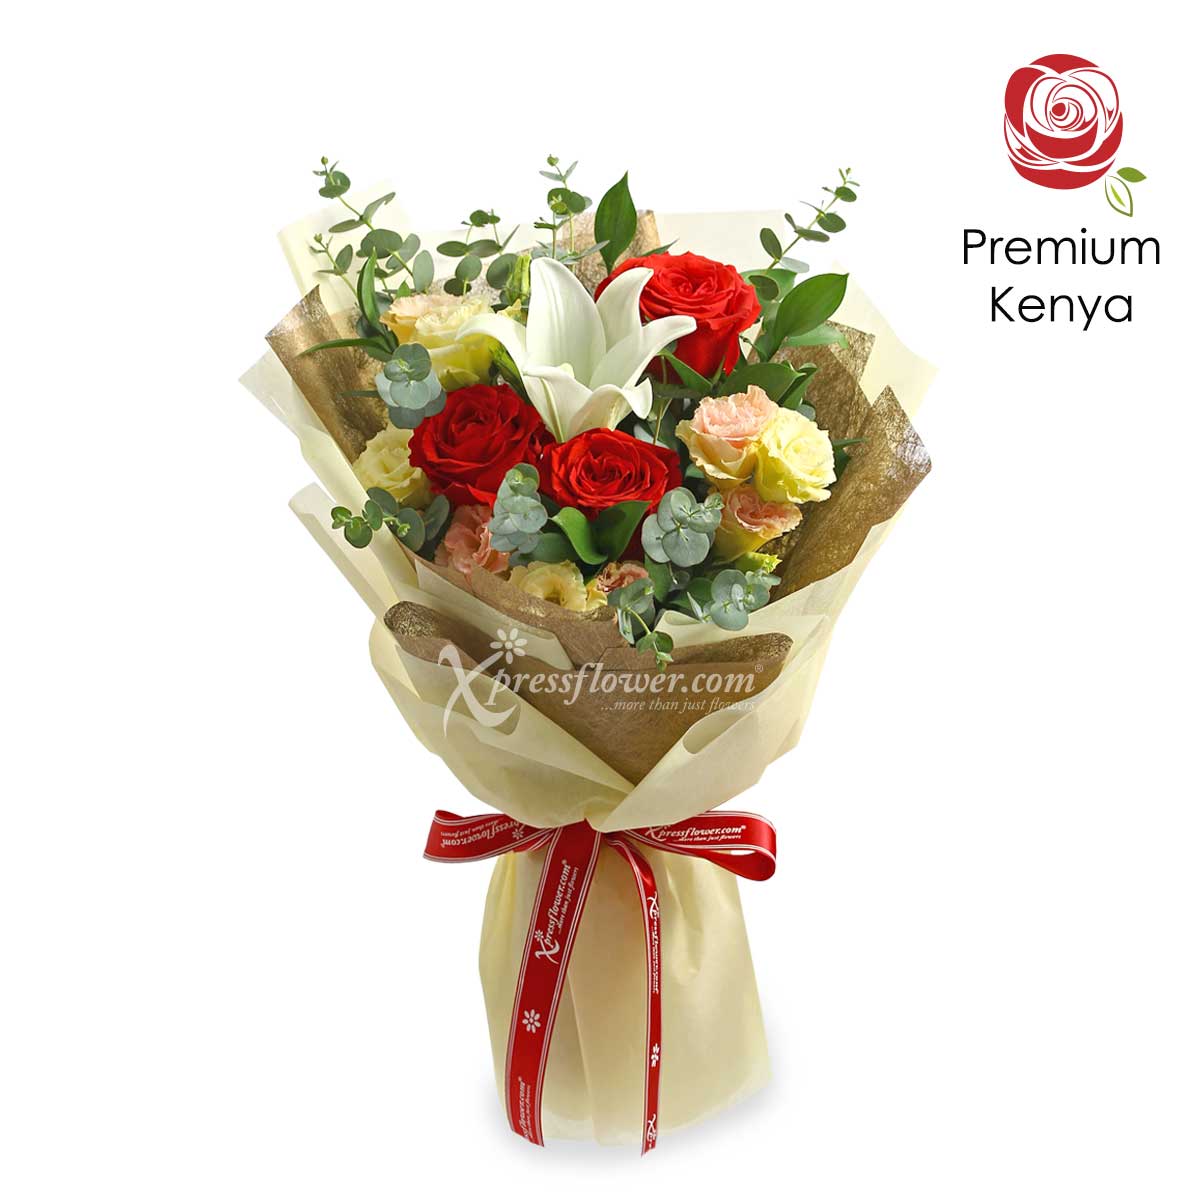 Luxy Charm (1 White Lily & 3 Red Roses)